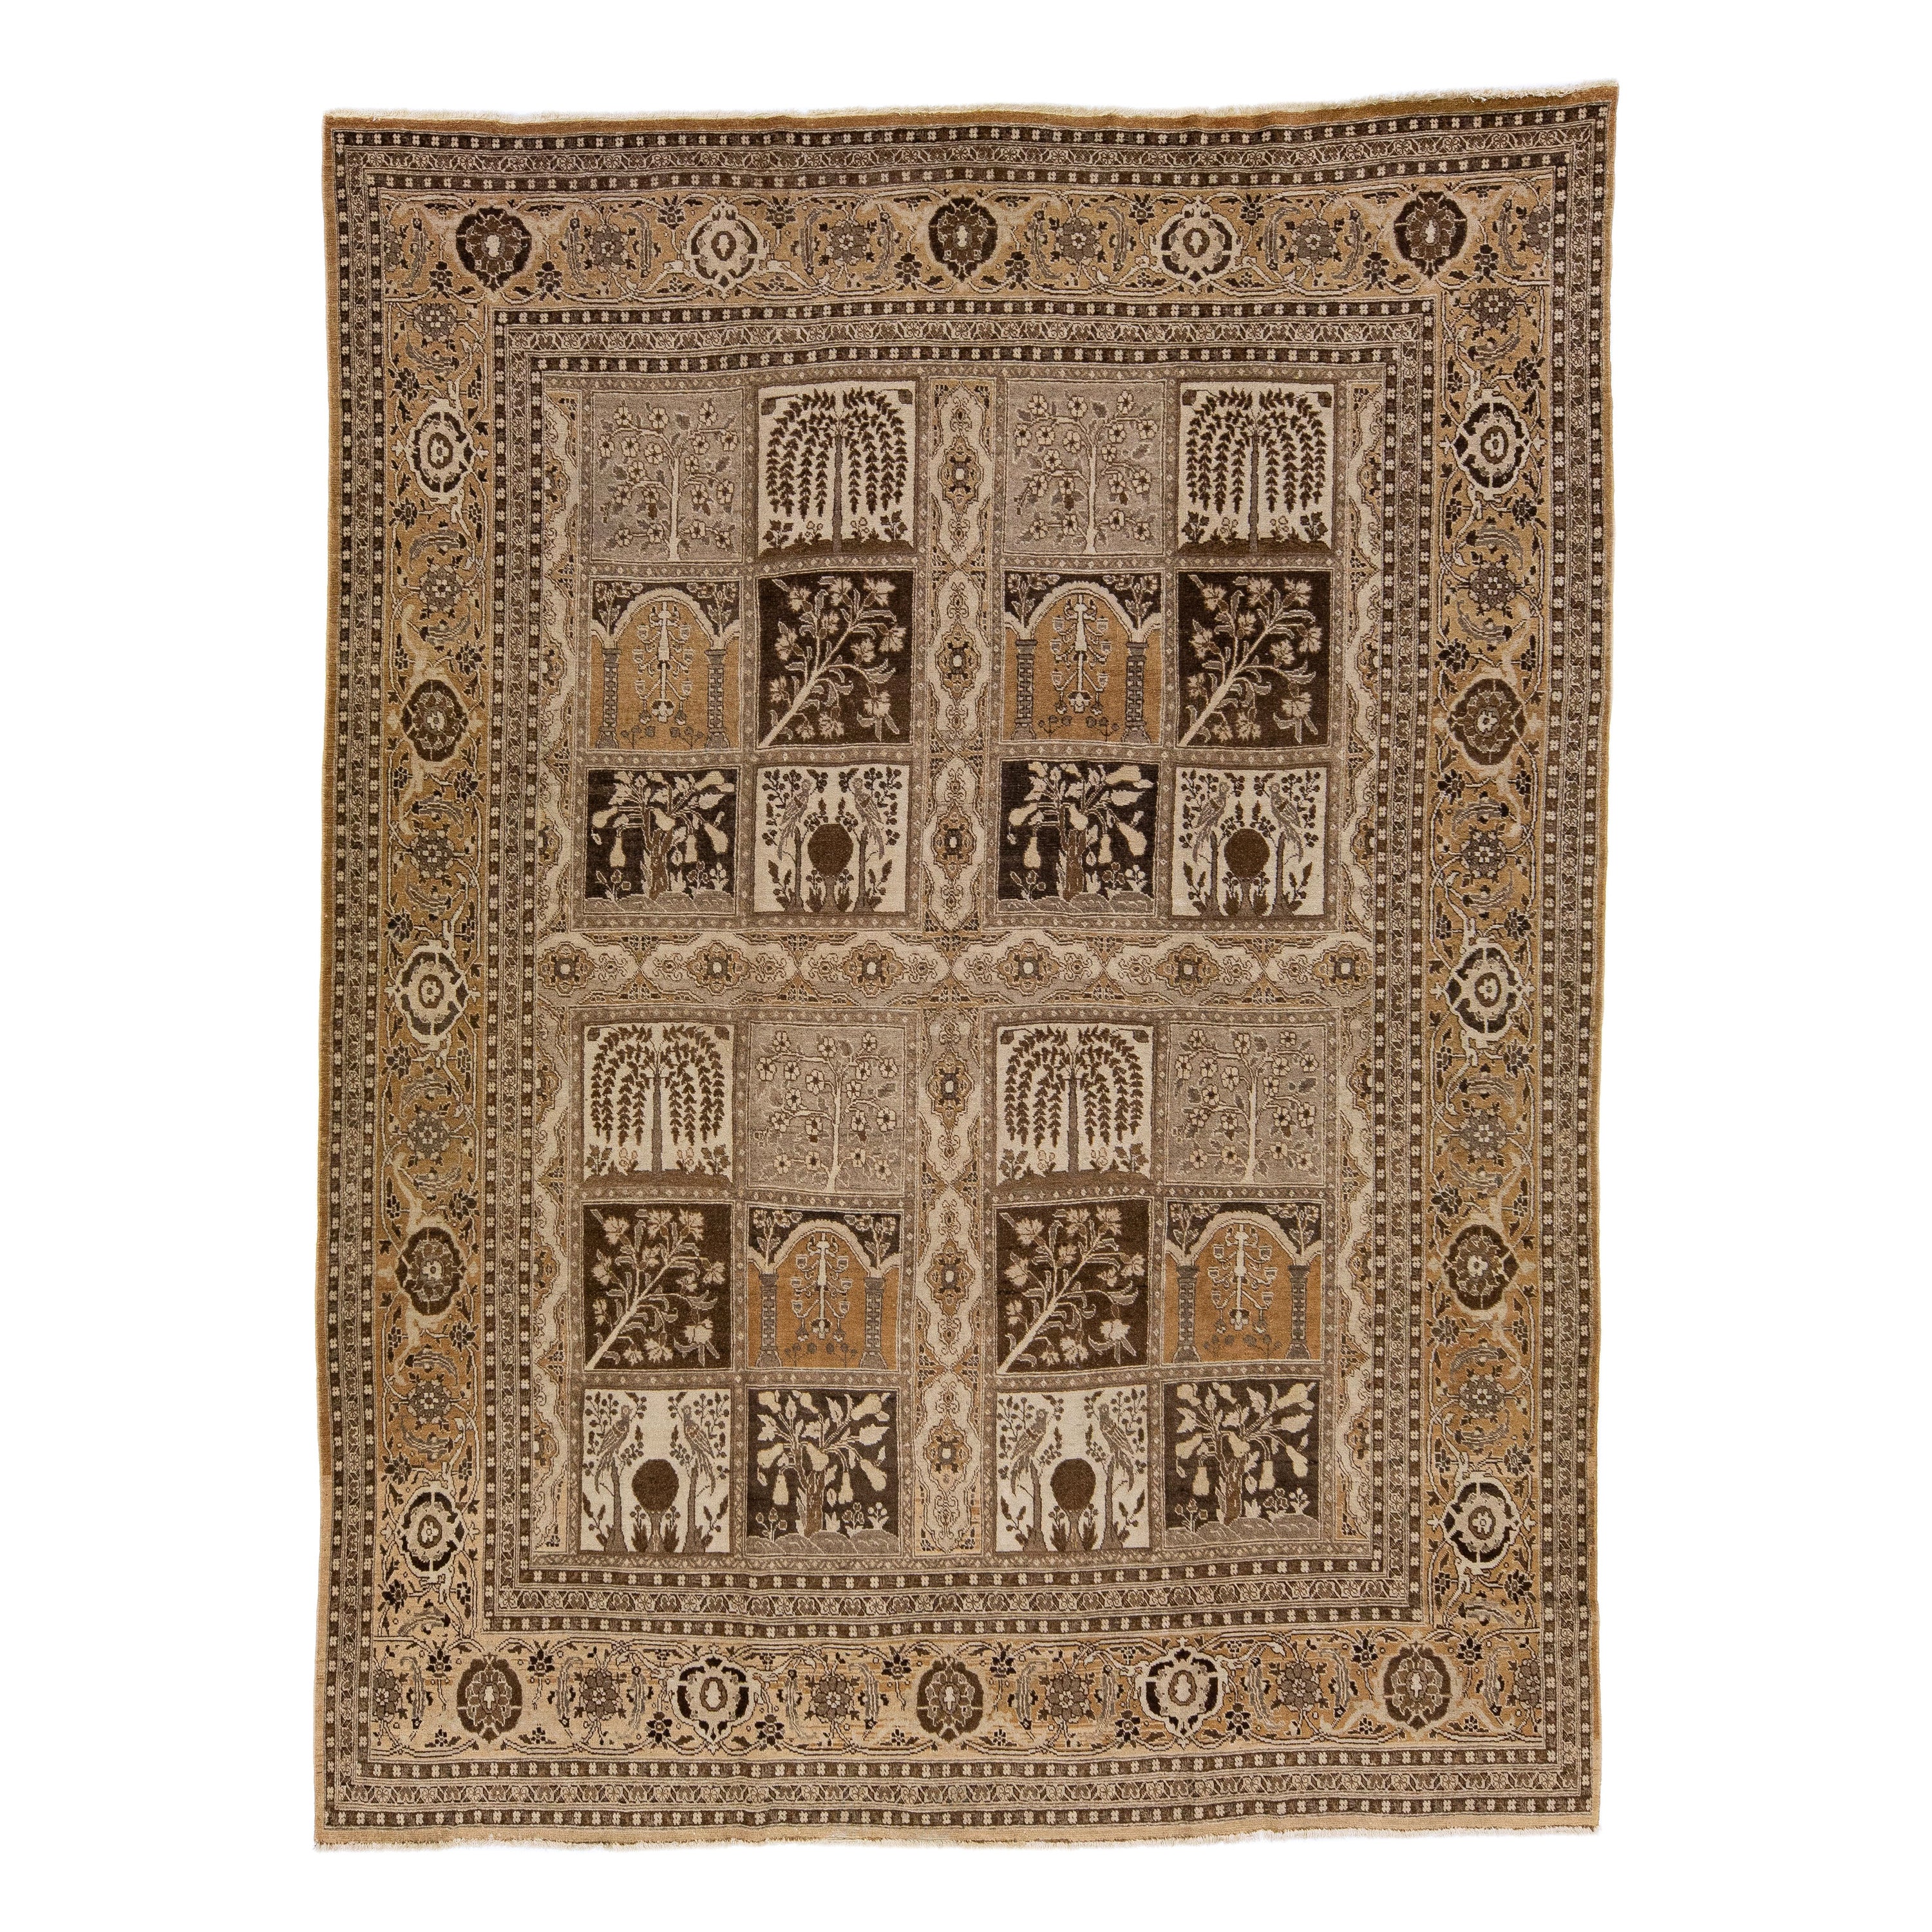 Brown Antique Persian Tabriz Handmade Wool Rug with Allover Design